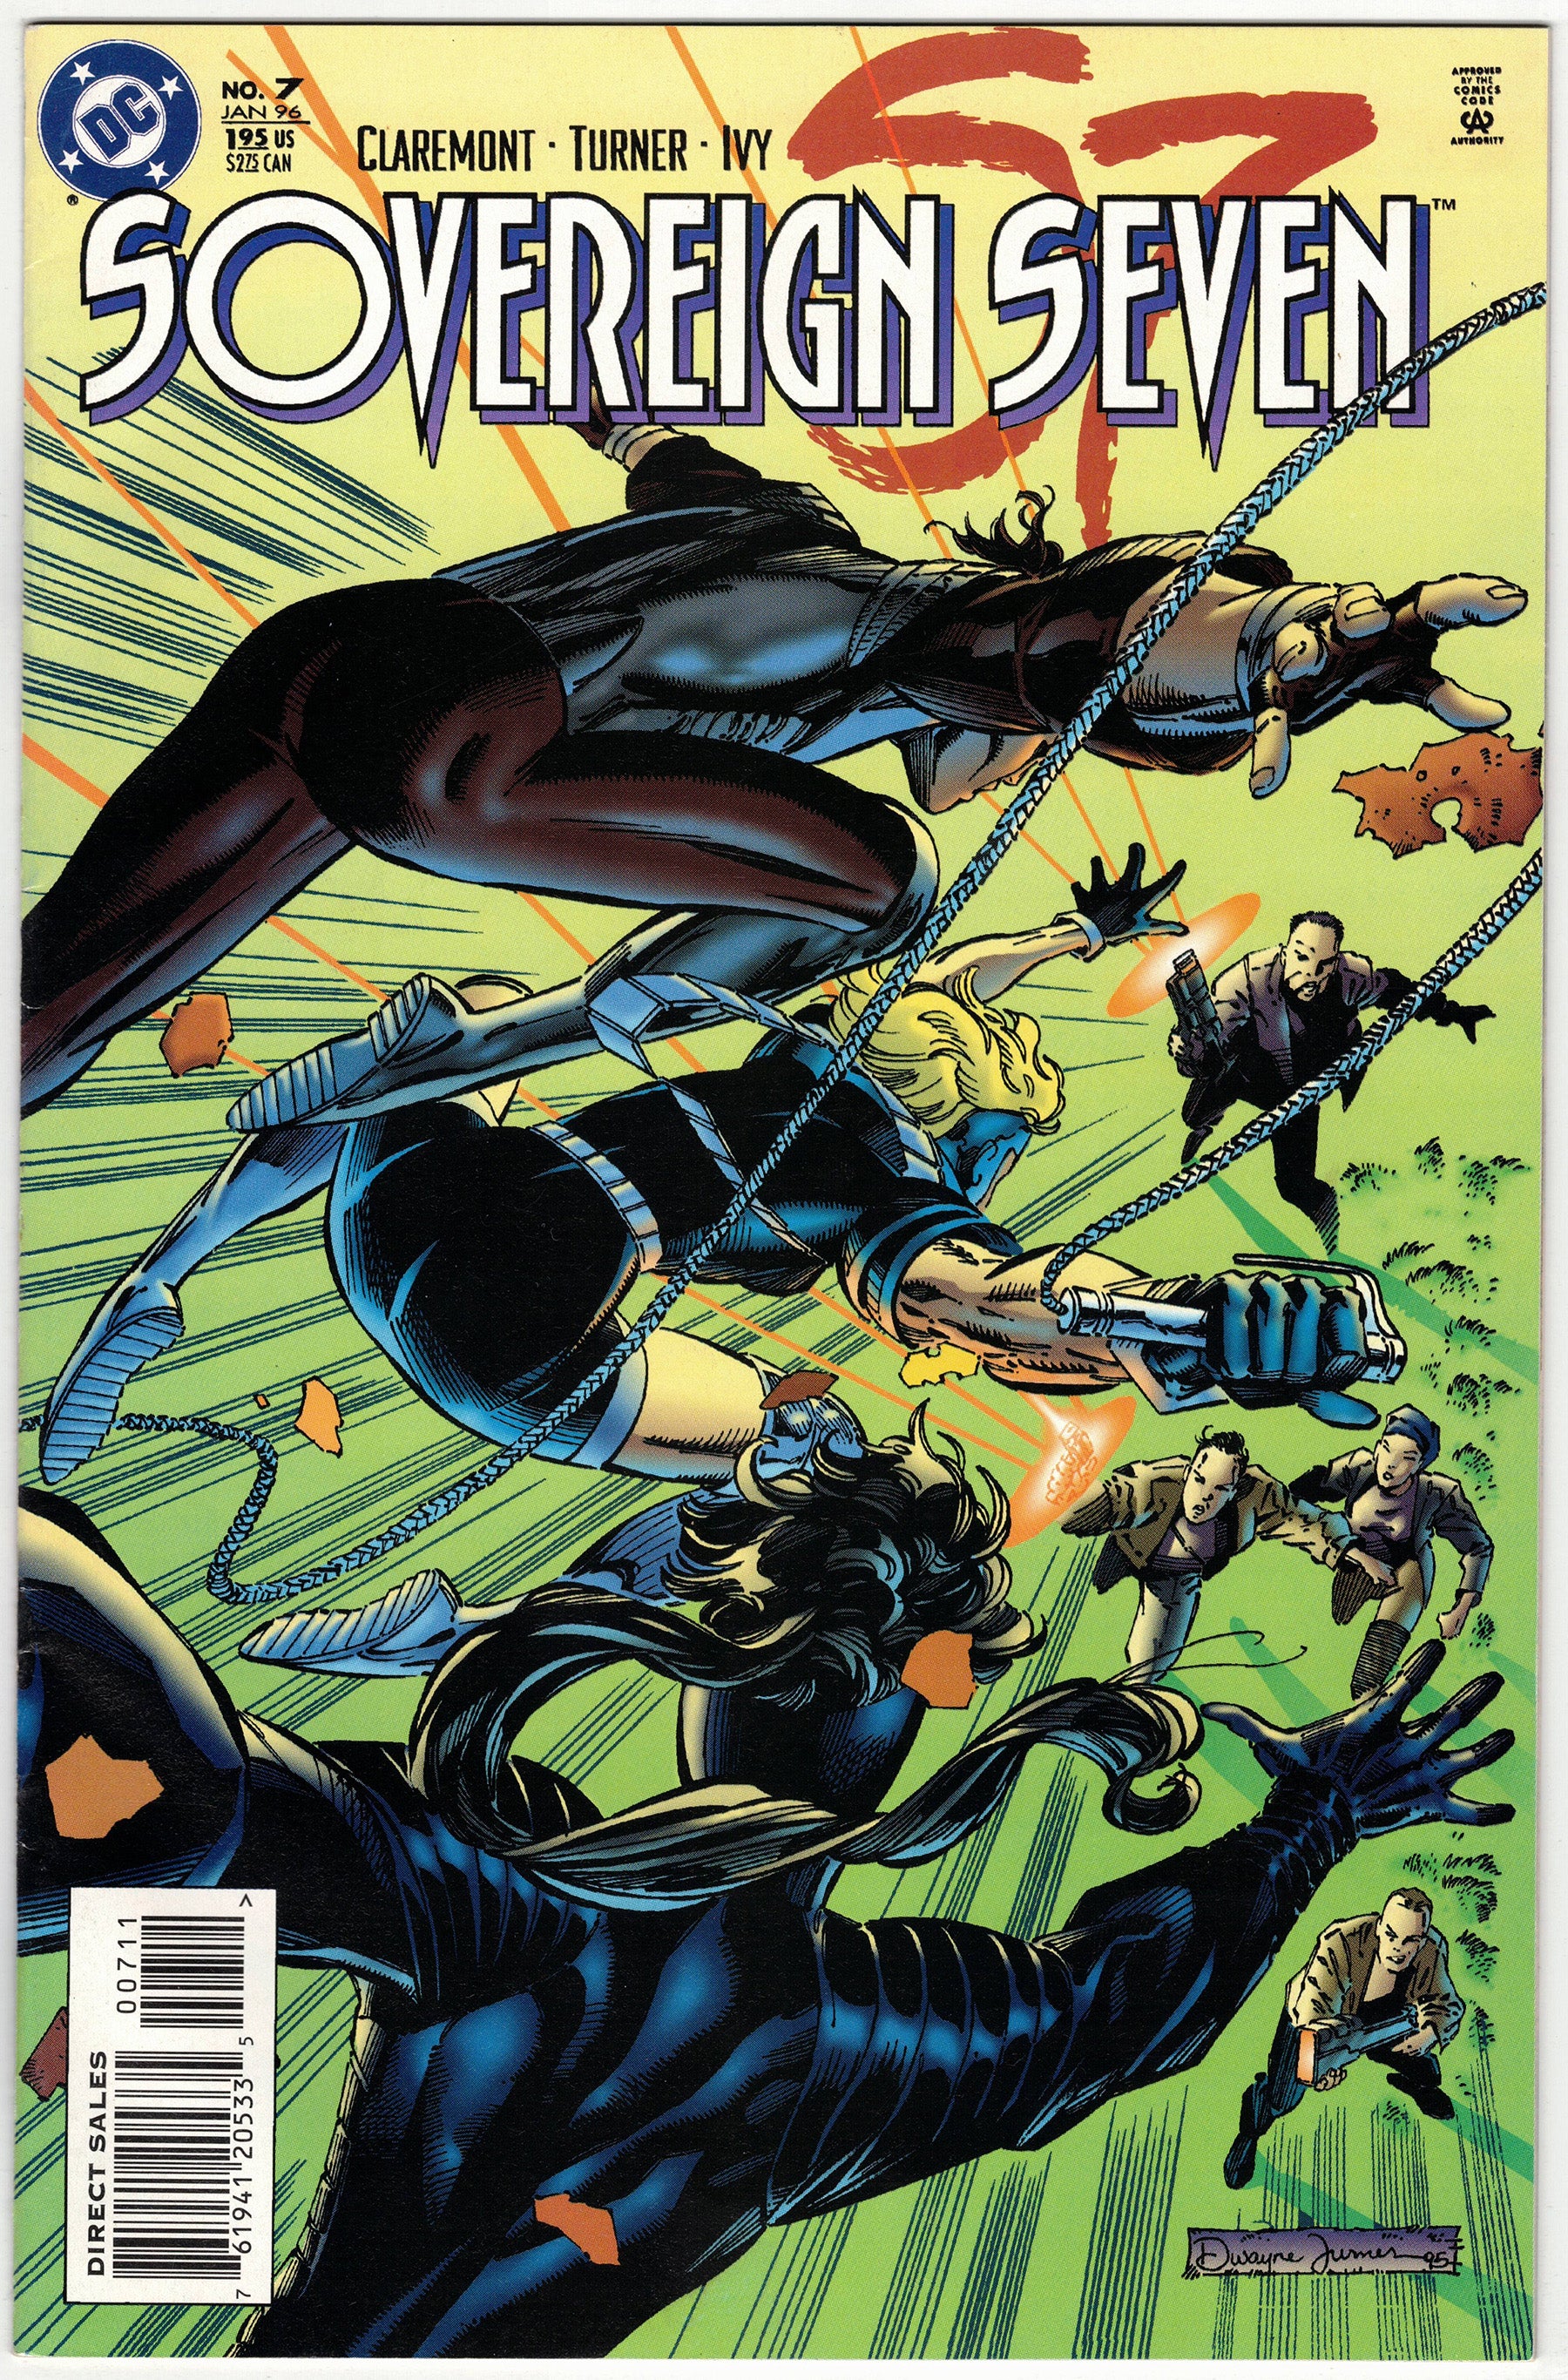 Photo of Sovereign Seven (1996) Issue 7 Comic sold by Stronghold Collectibles